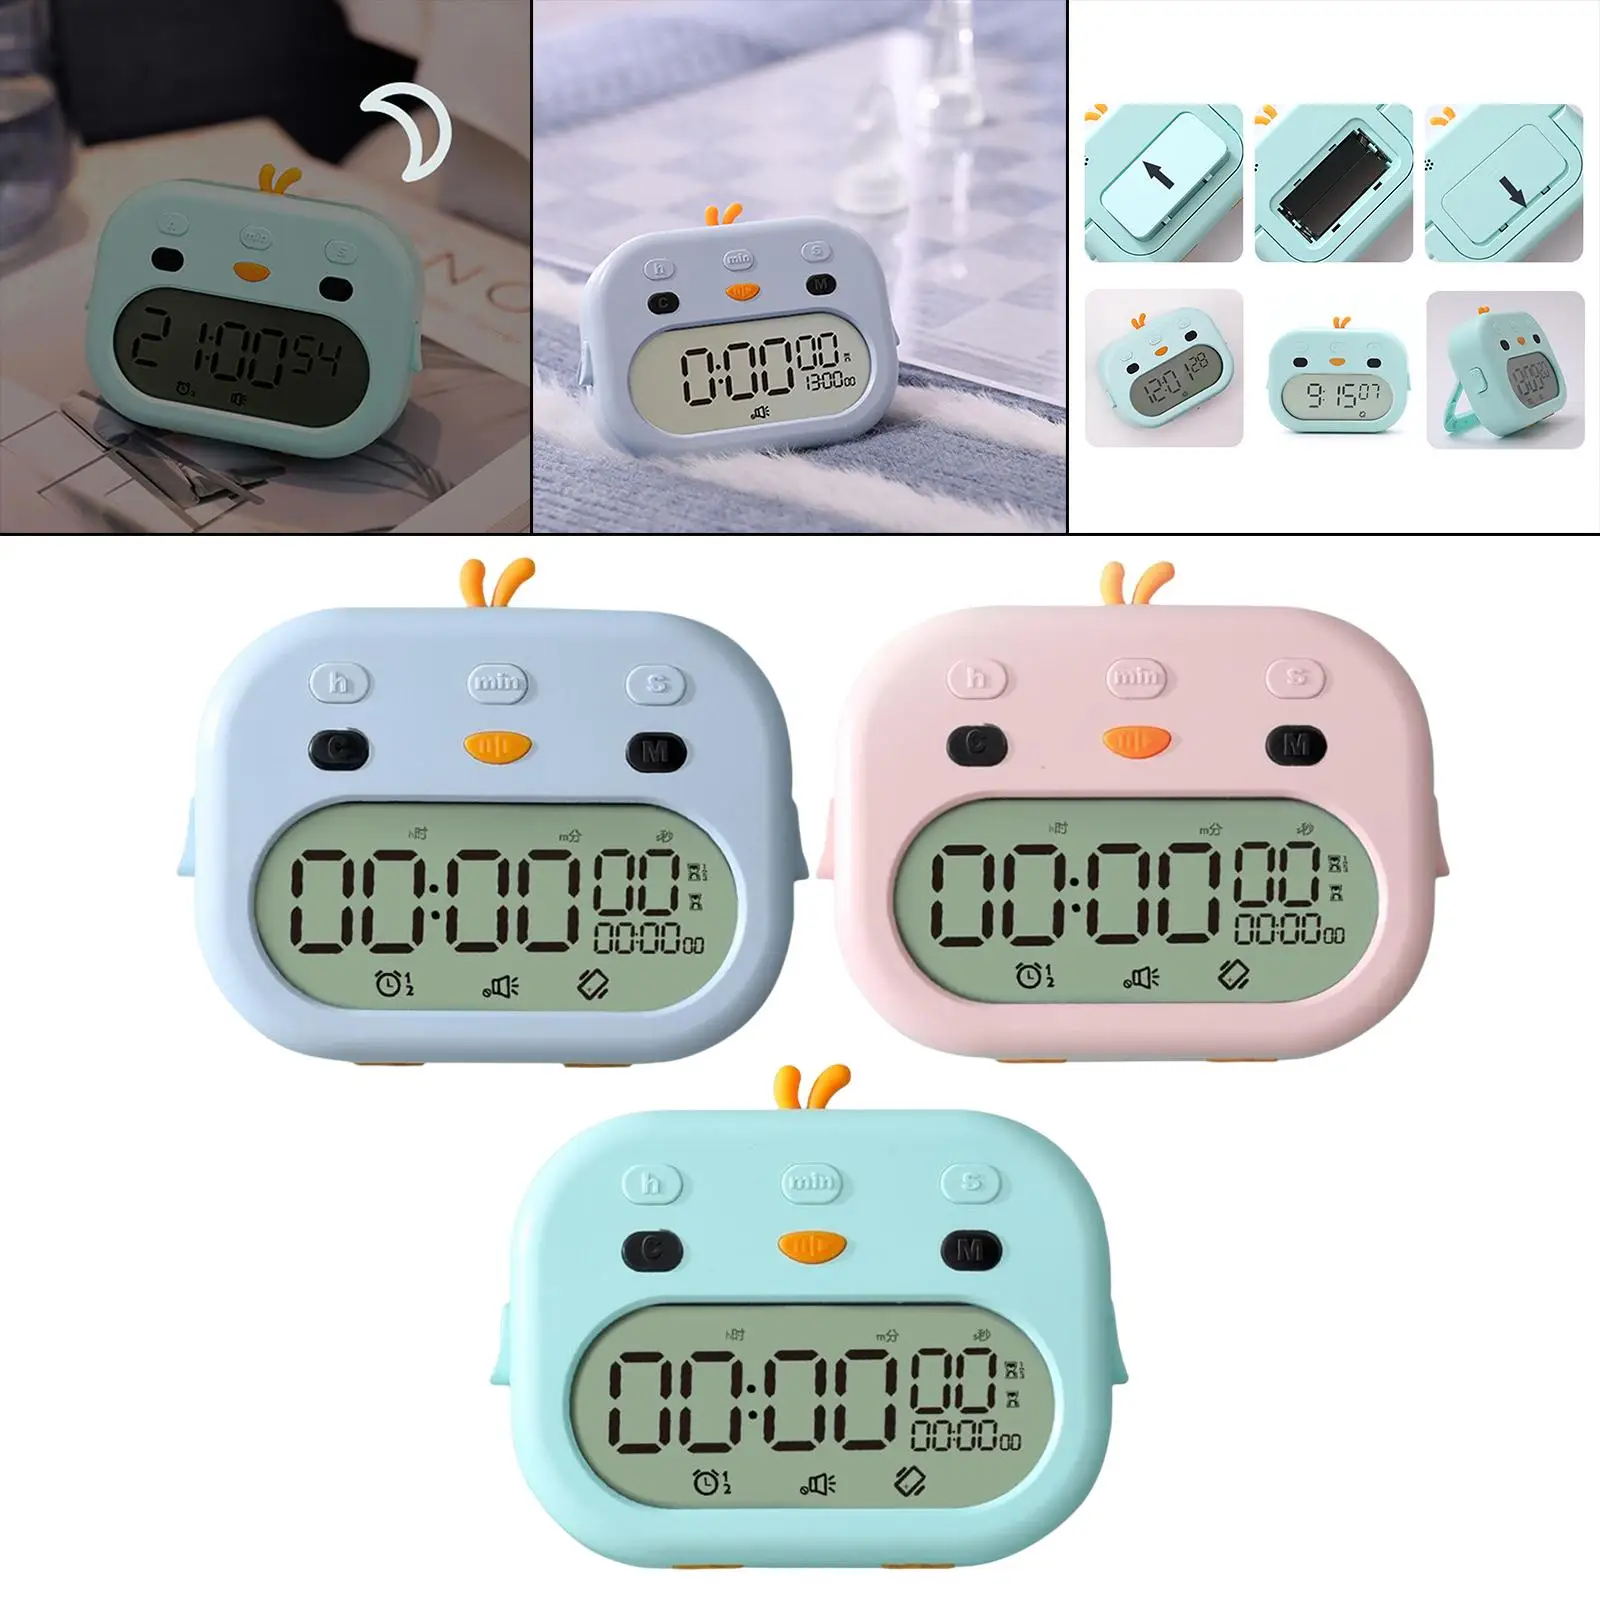 Multifunctional Digital Timer Clock Cute Count up Down with Stand Portable Power Saving Adjustable Loud Alarm for Games Sports